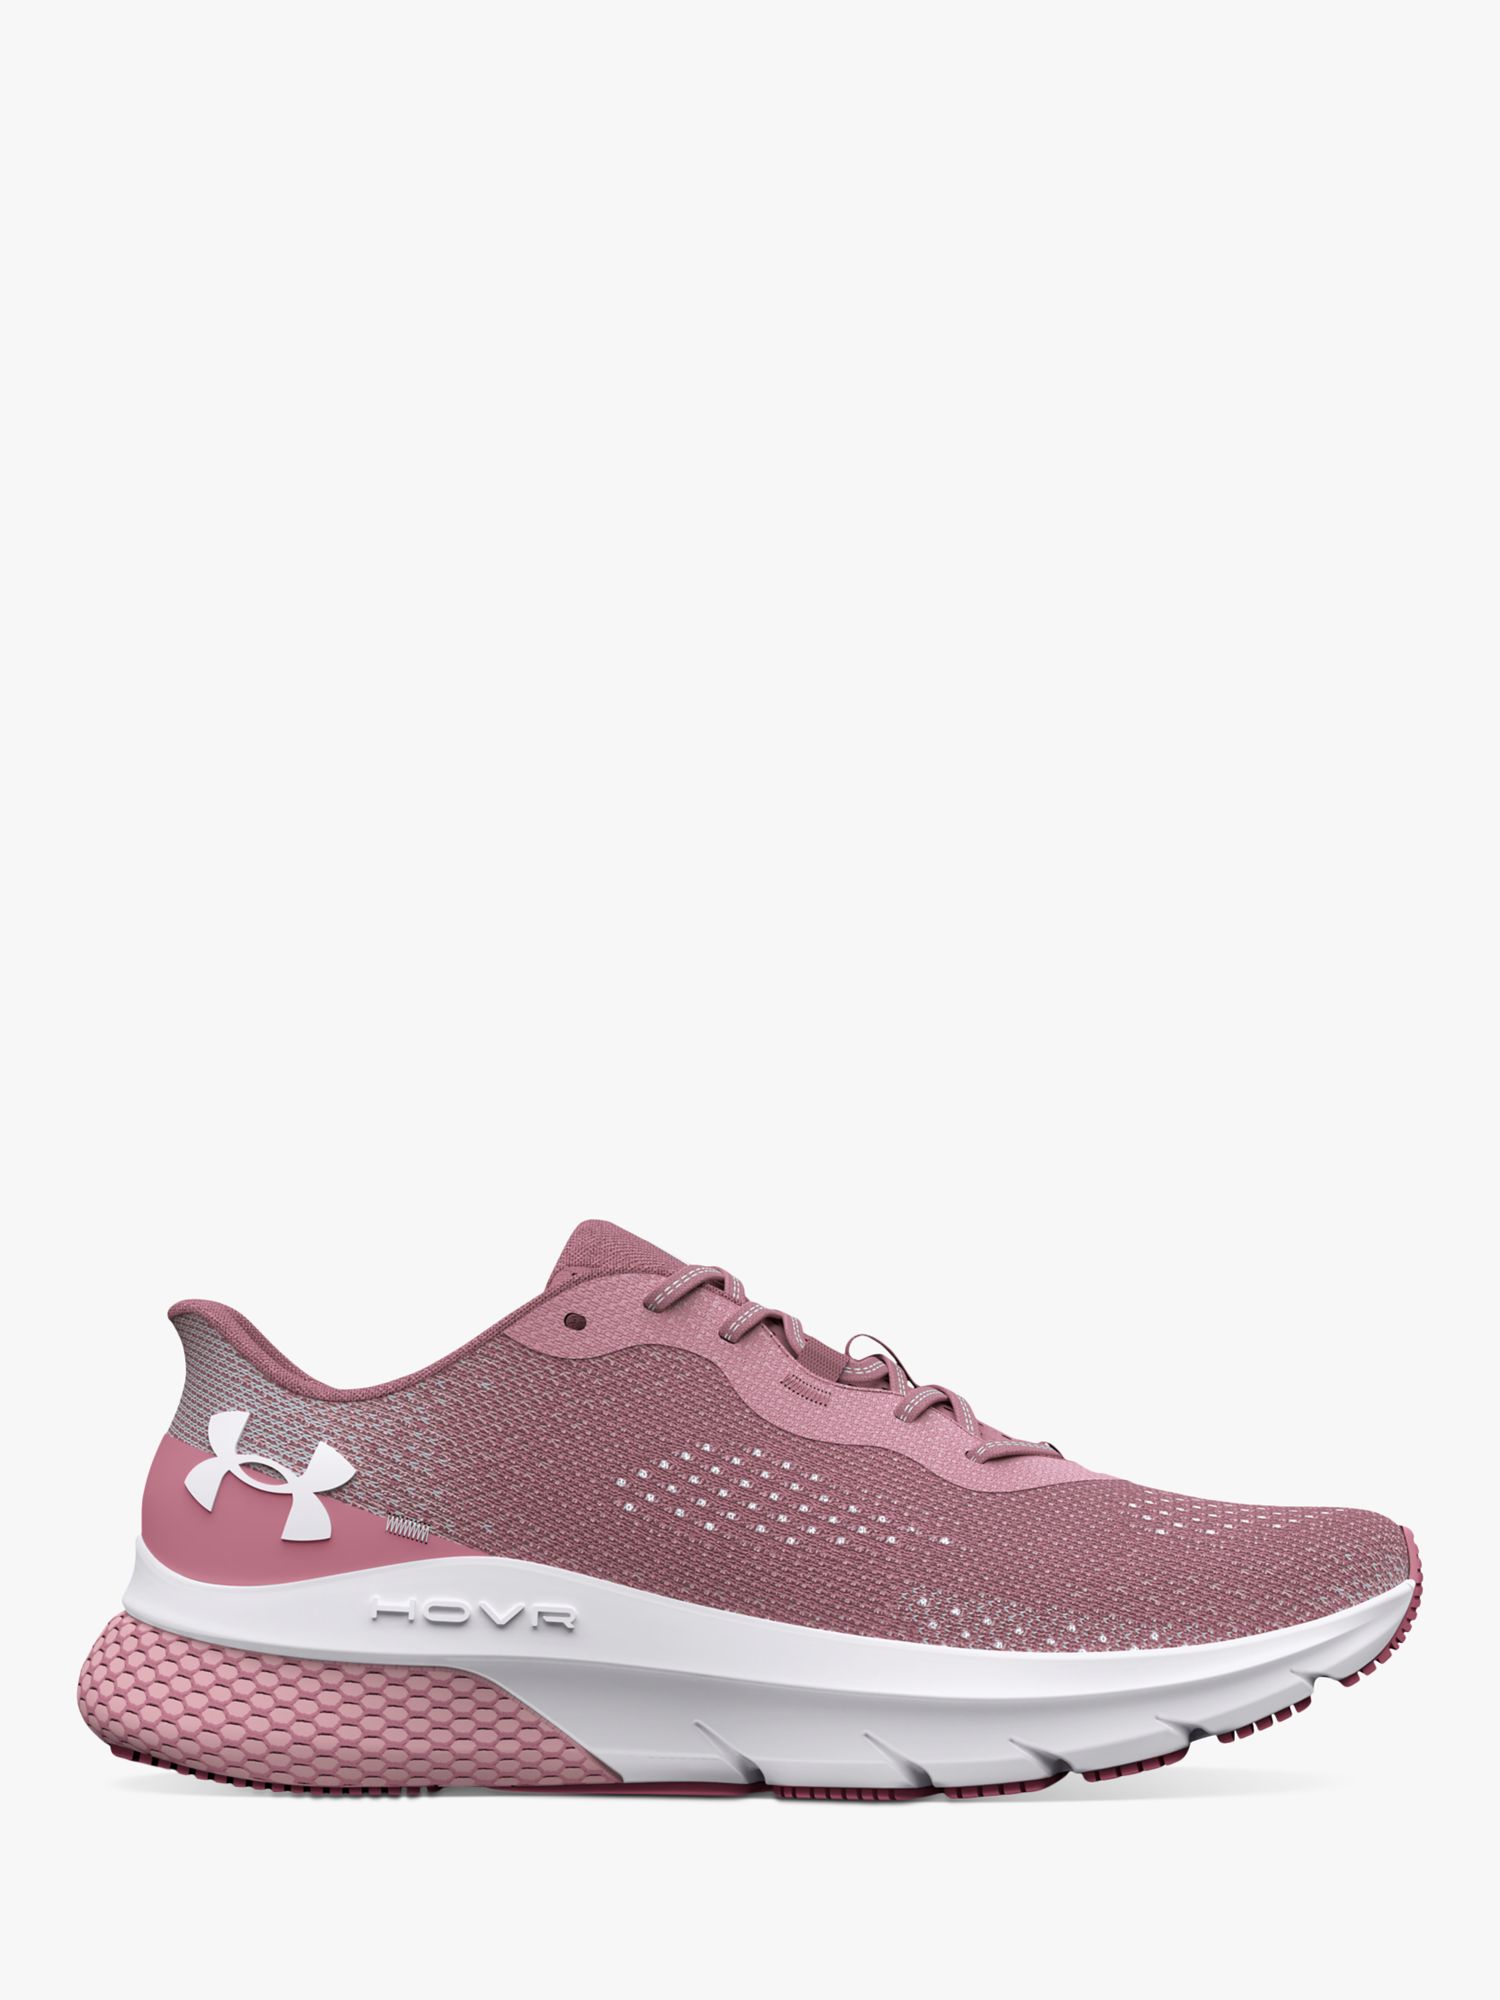 Under Armour Charged Aurora 2 Women's Cross Trainers, Black/Metallic Warm  Silver at John Lewis & Partners